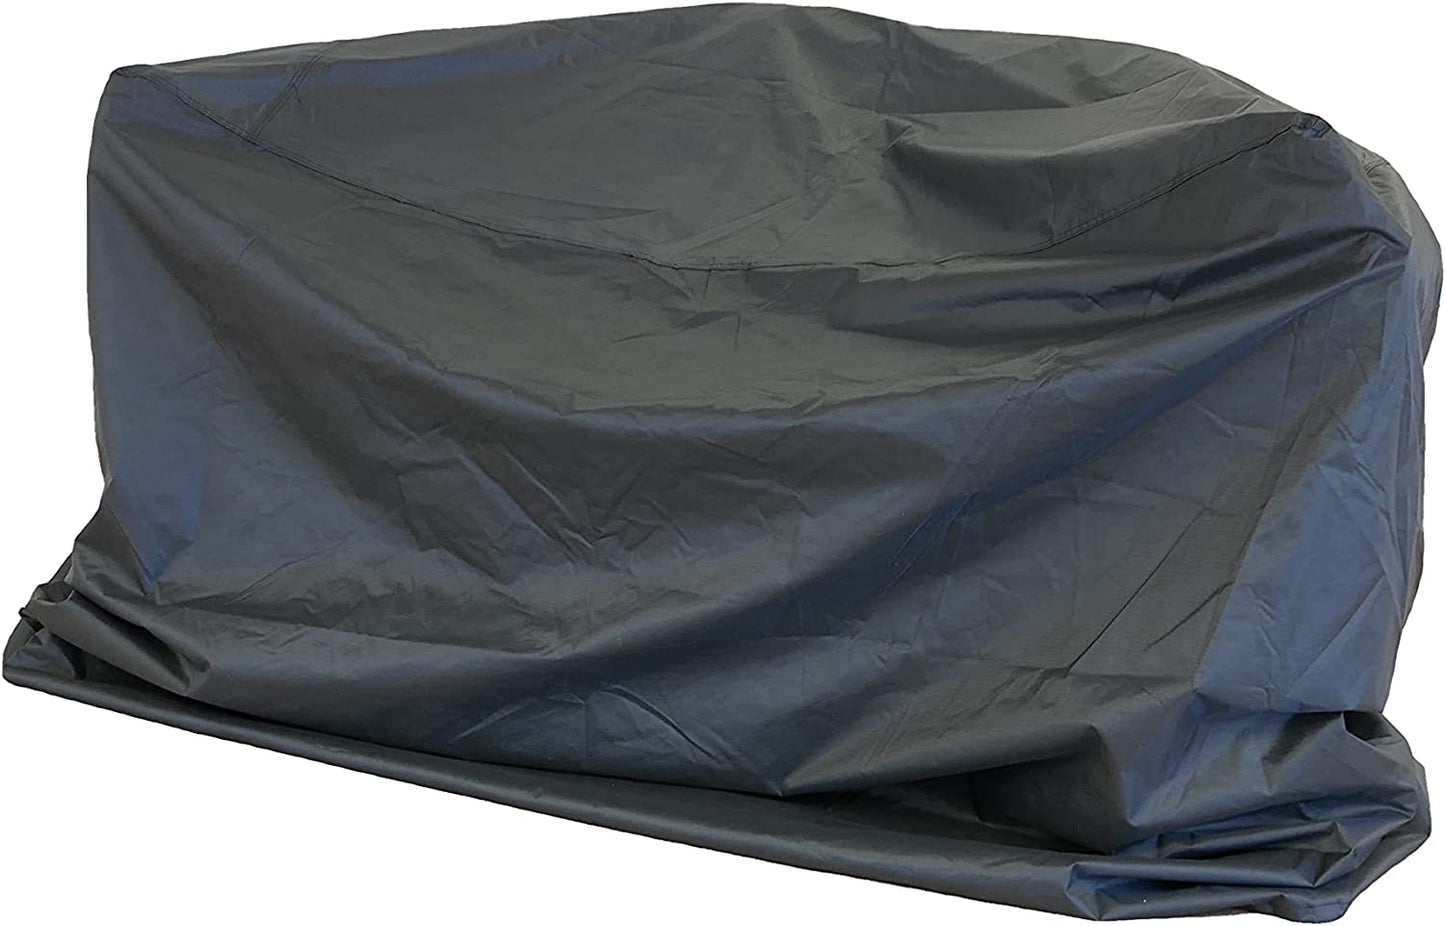 Outdoor Garden Furniture Cover For Large Daybed - Mail Order Packaging -169x84x79cm